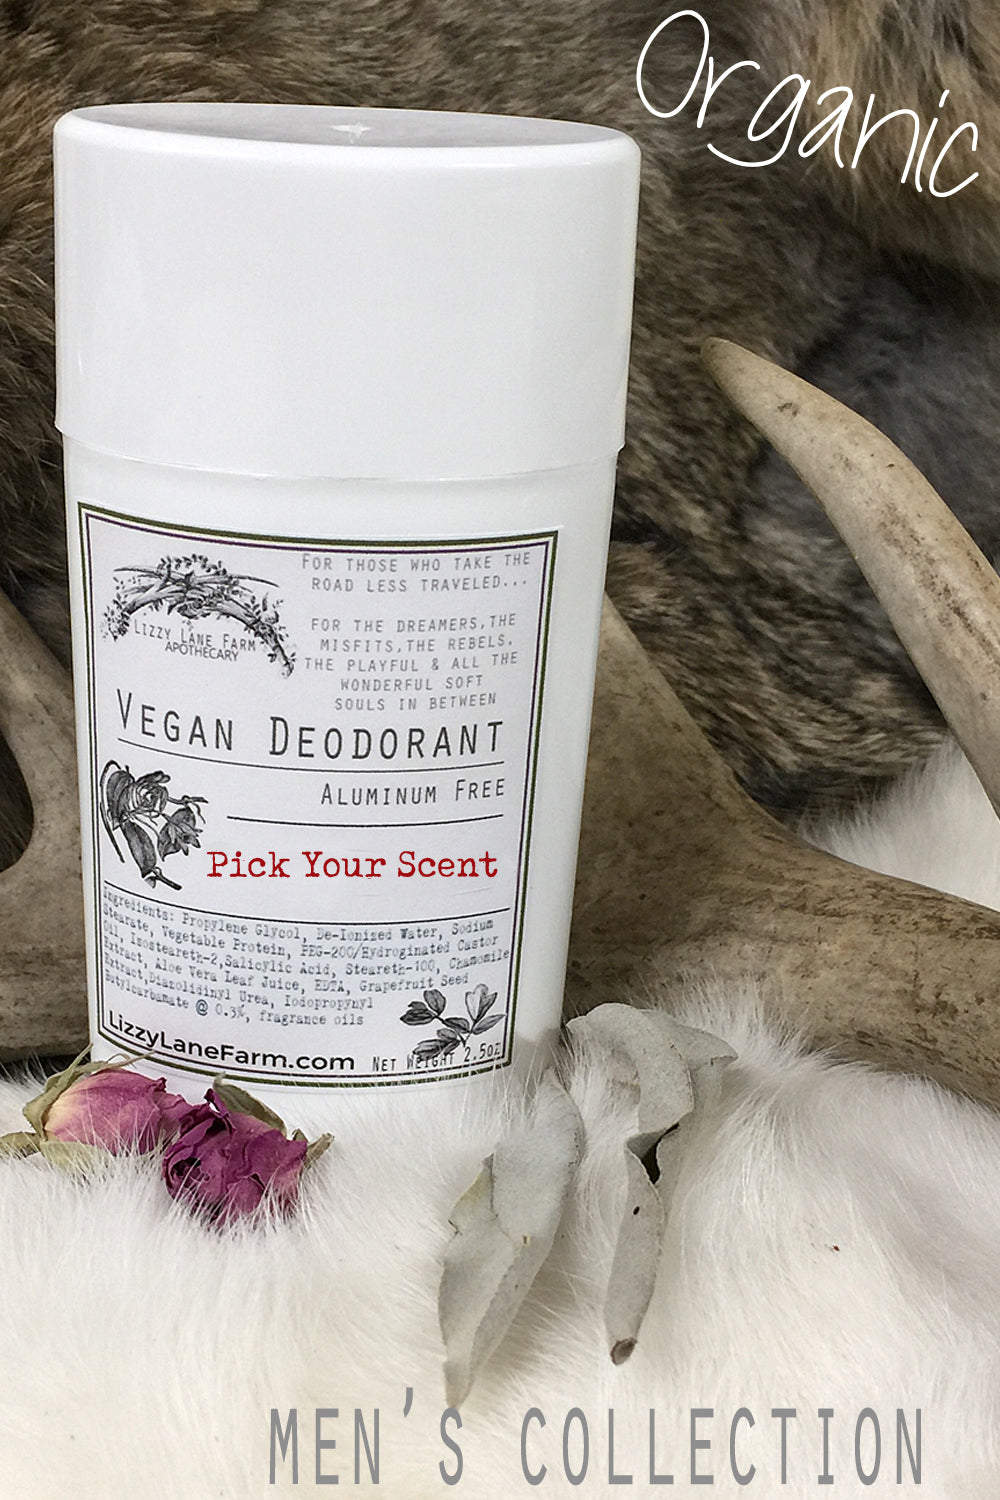 Natural Deodorant: Men's Collection :: PICK • A • SCENT - Lizzy Lane Farm Apothecary